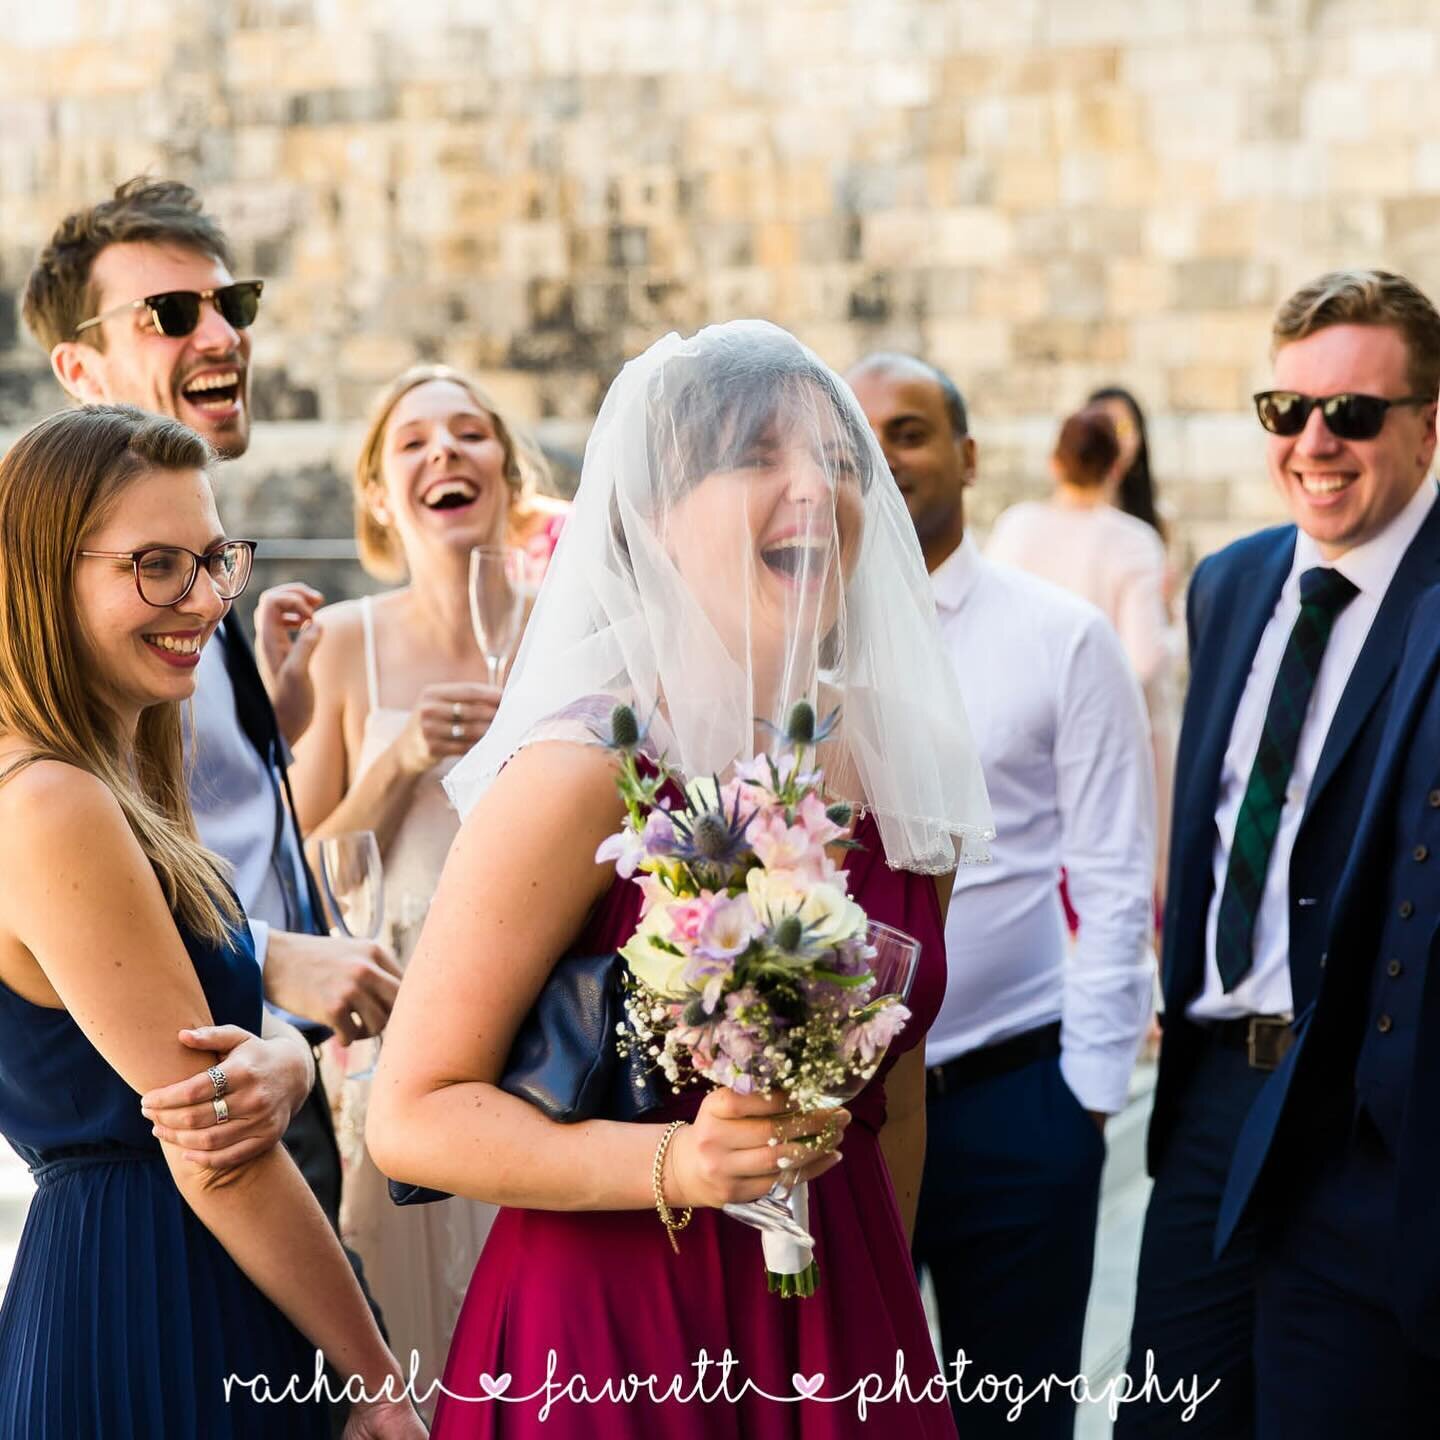 🤩 CANDIDS 🤩

🩷 Things I often share on my feed: Beautiful photos of the Bride and Groom
🩷 Things I don&rsquo;t often share: Photos of the chaos that occurs when I catch the wedding guests passing the Bride&rsquo;s veil around to try on! 🤣😍

#ha